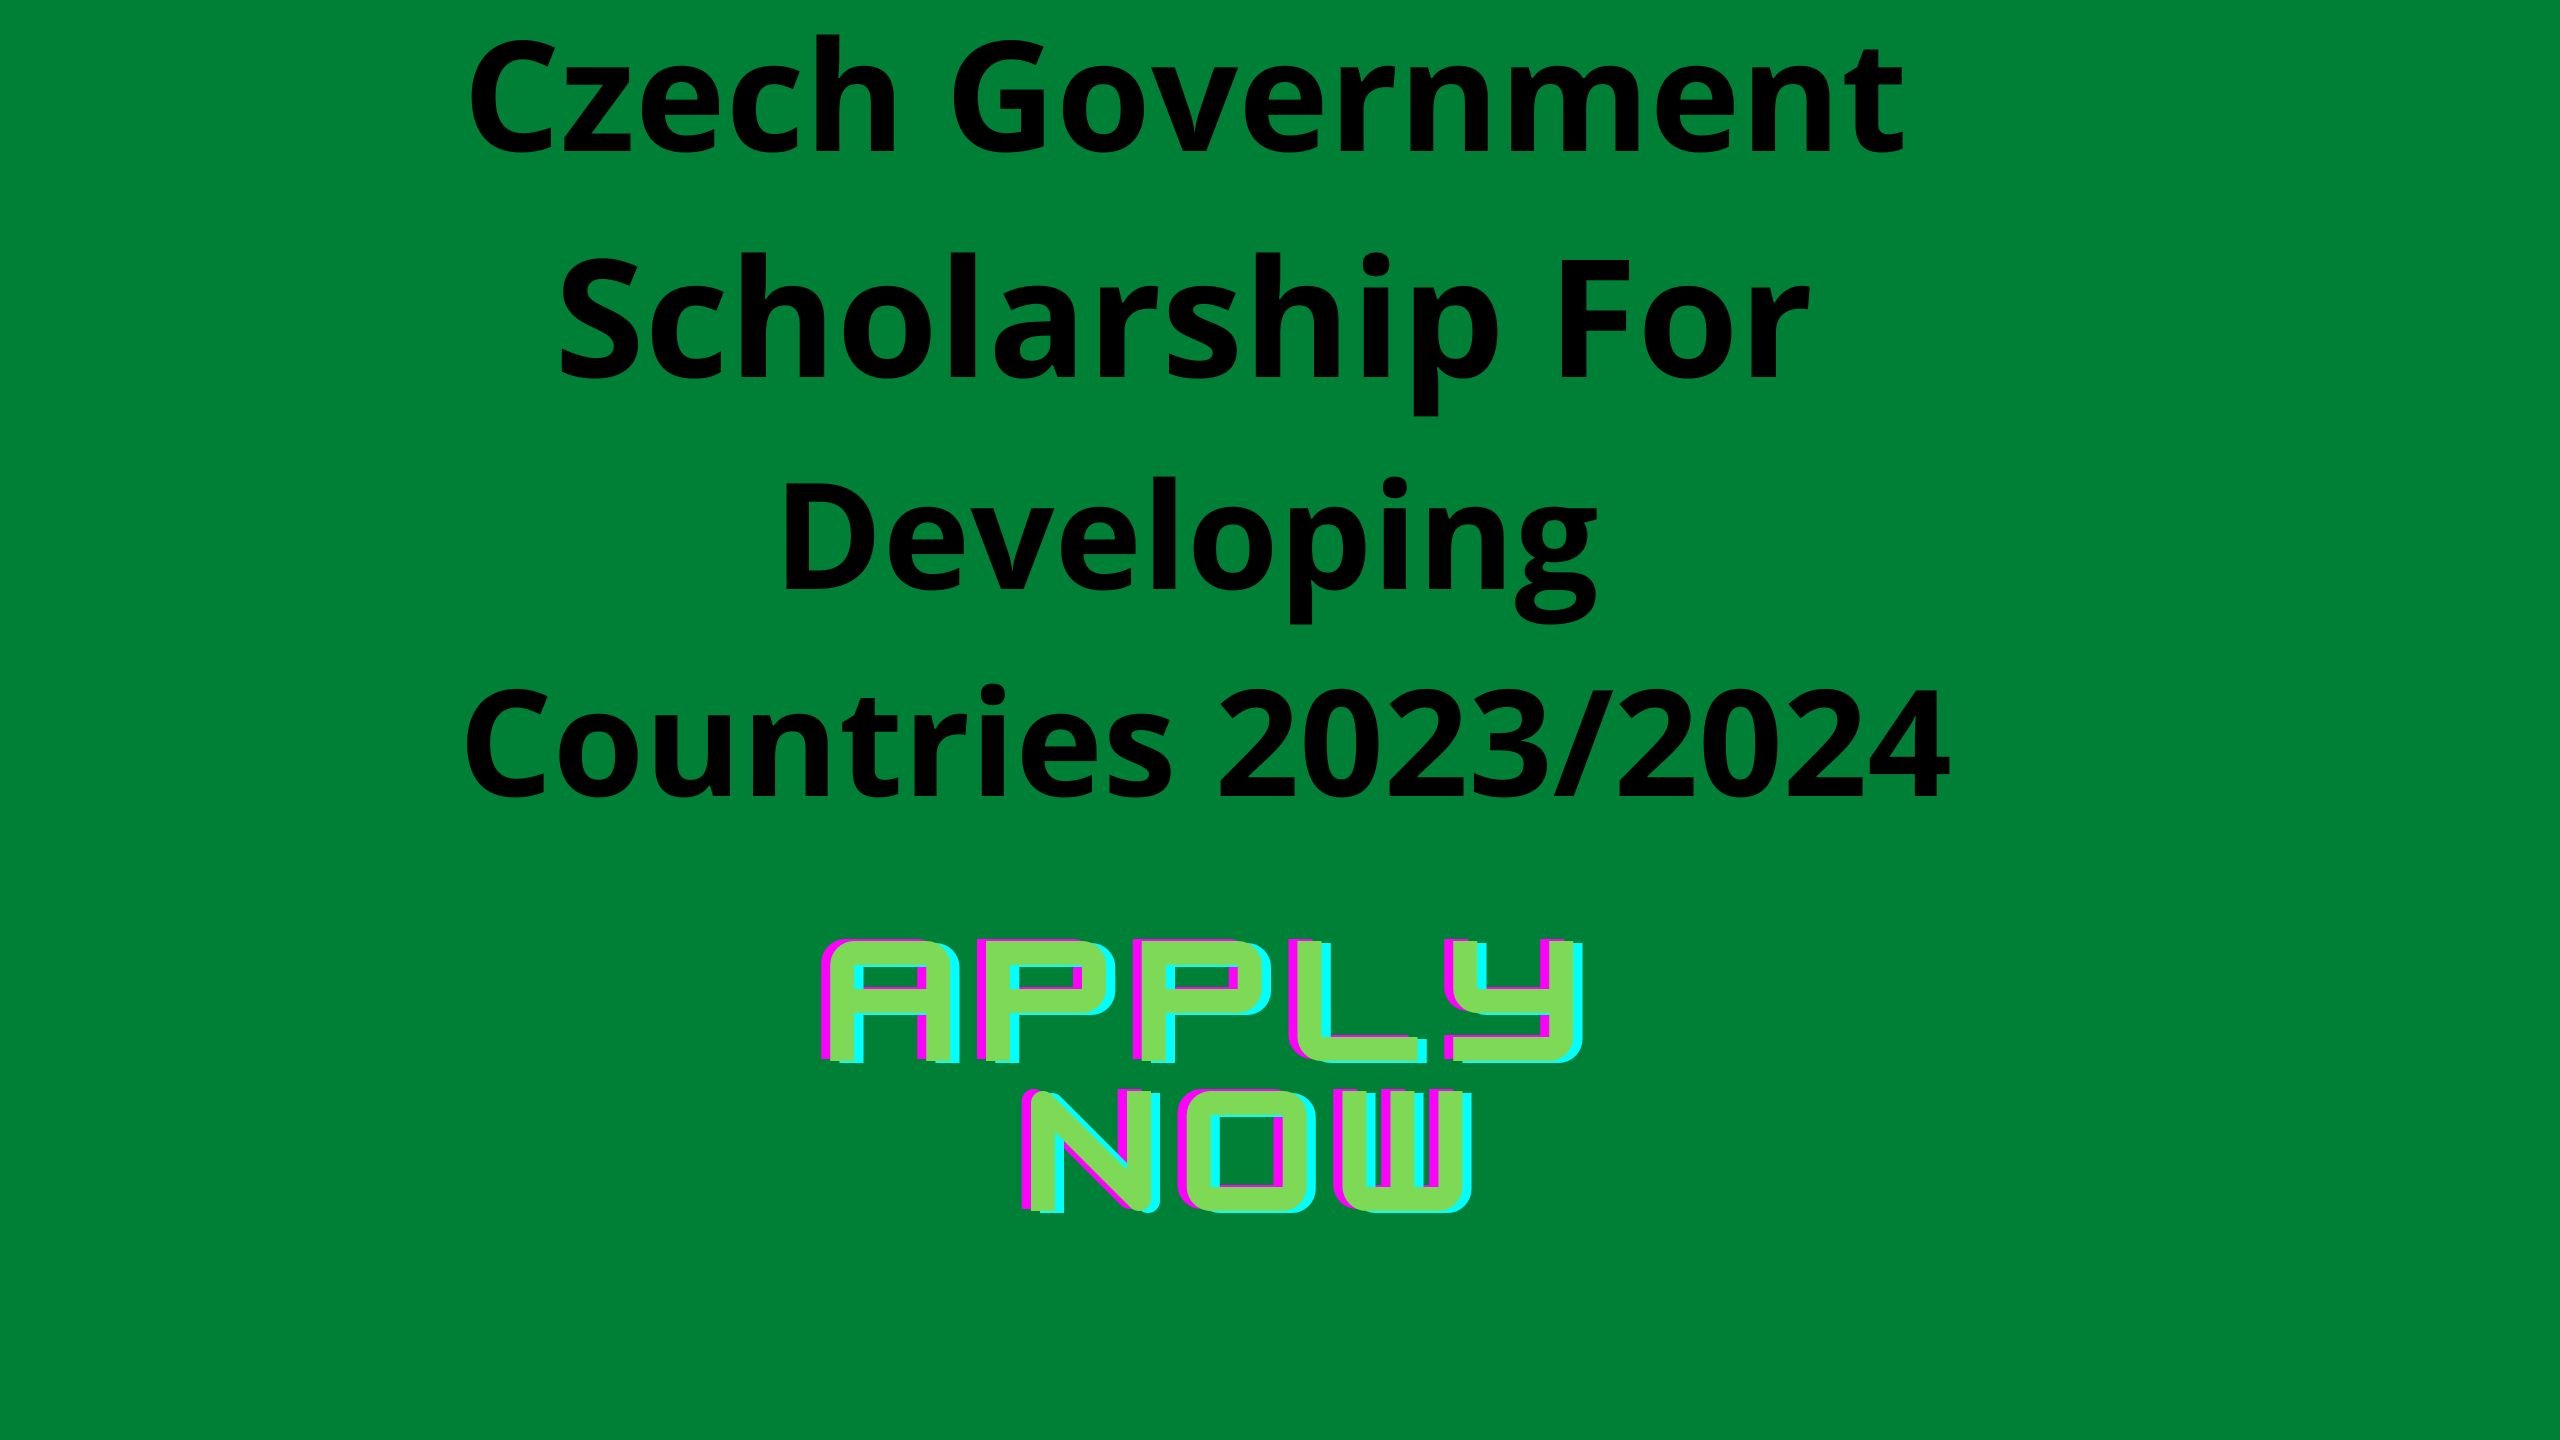 Czech Government Scholarship For Developing Countries 2023/2024